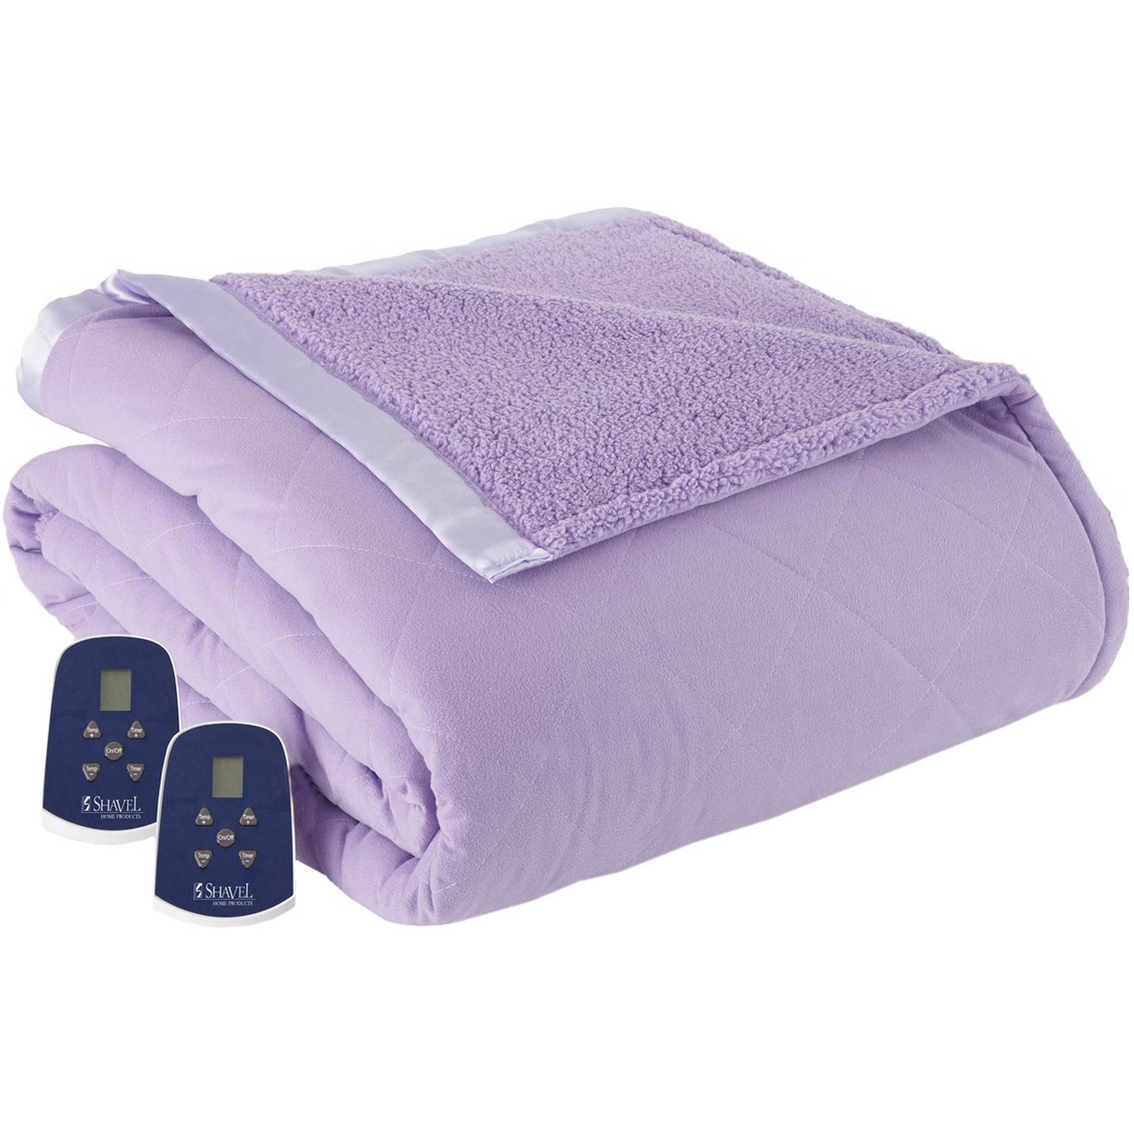 Micro Flannel® Reverse to Sherpa Electric Blanket - Image 1 of 2